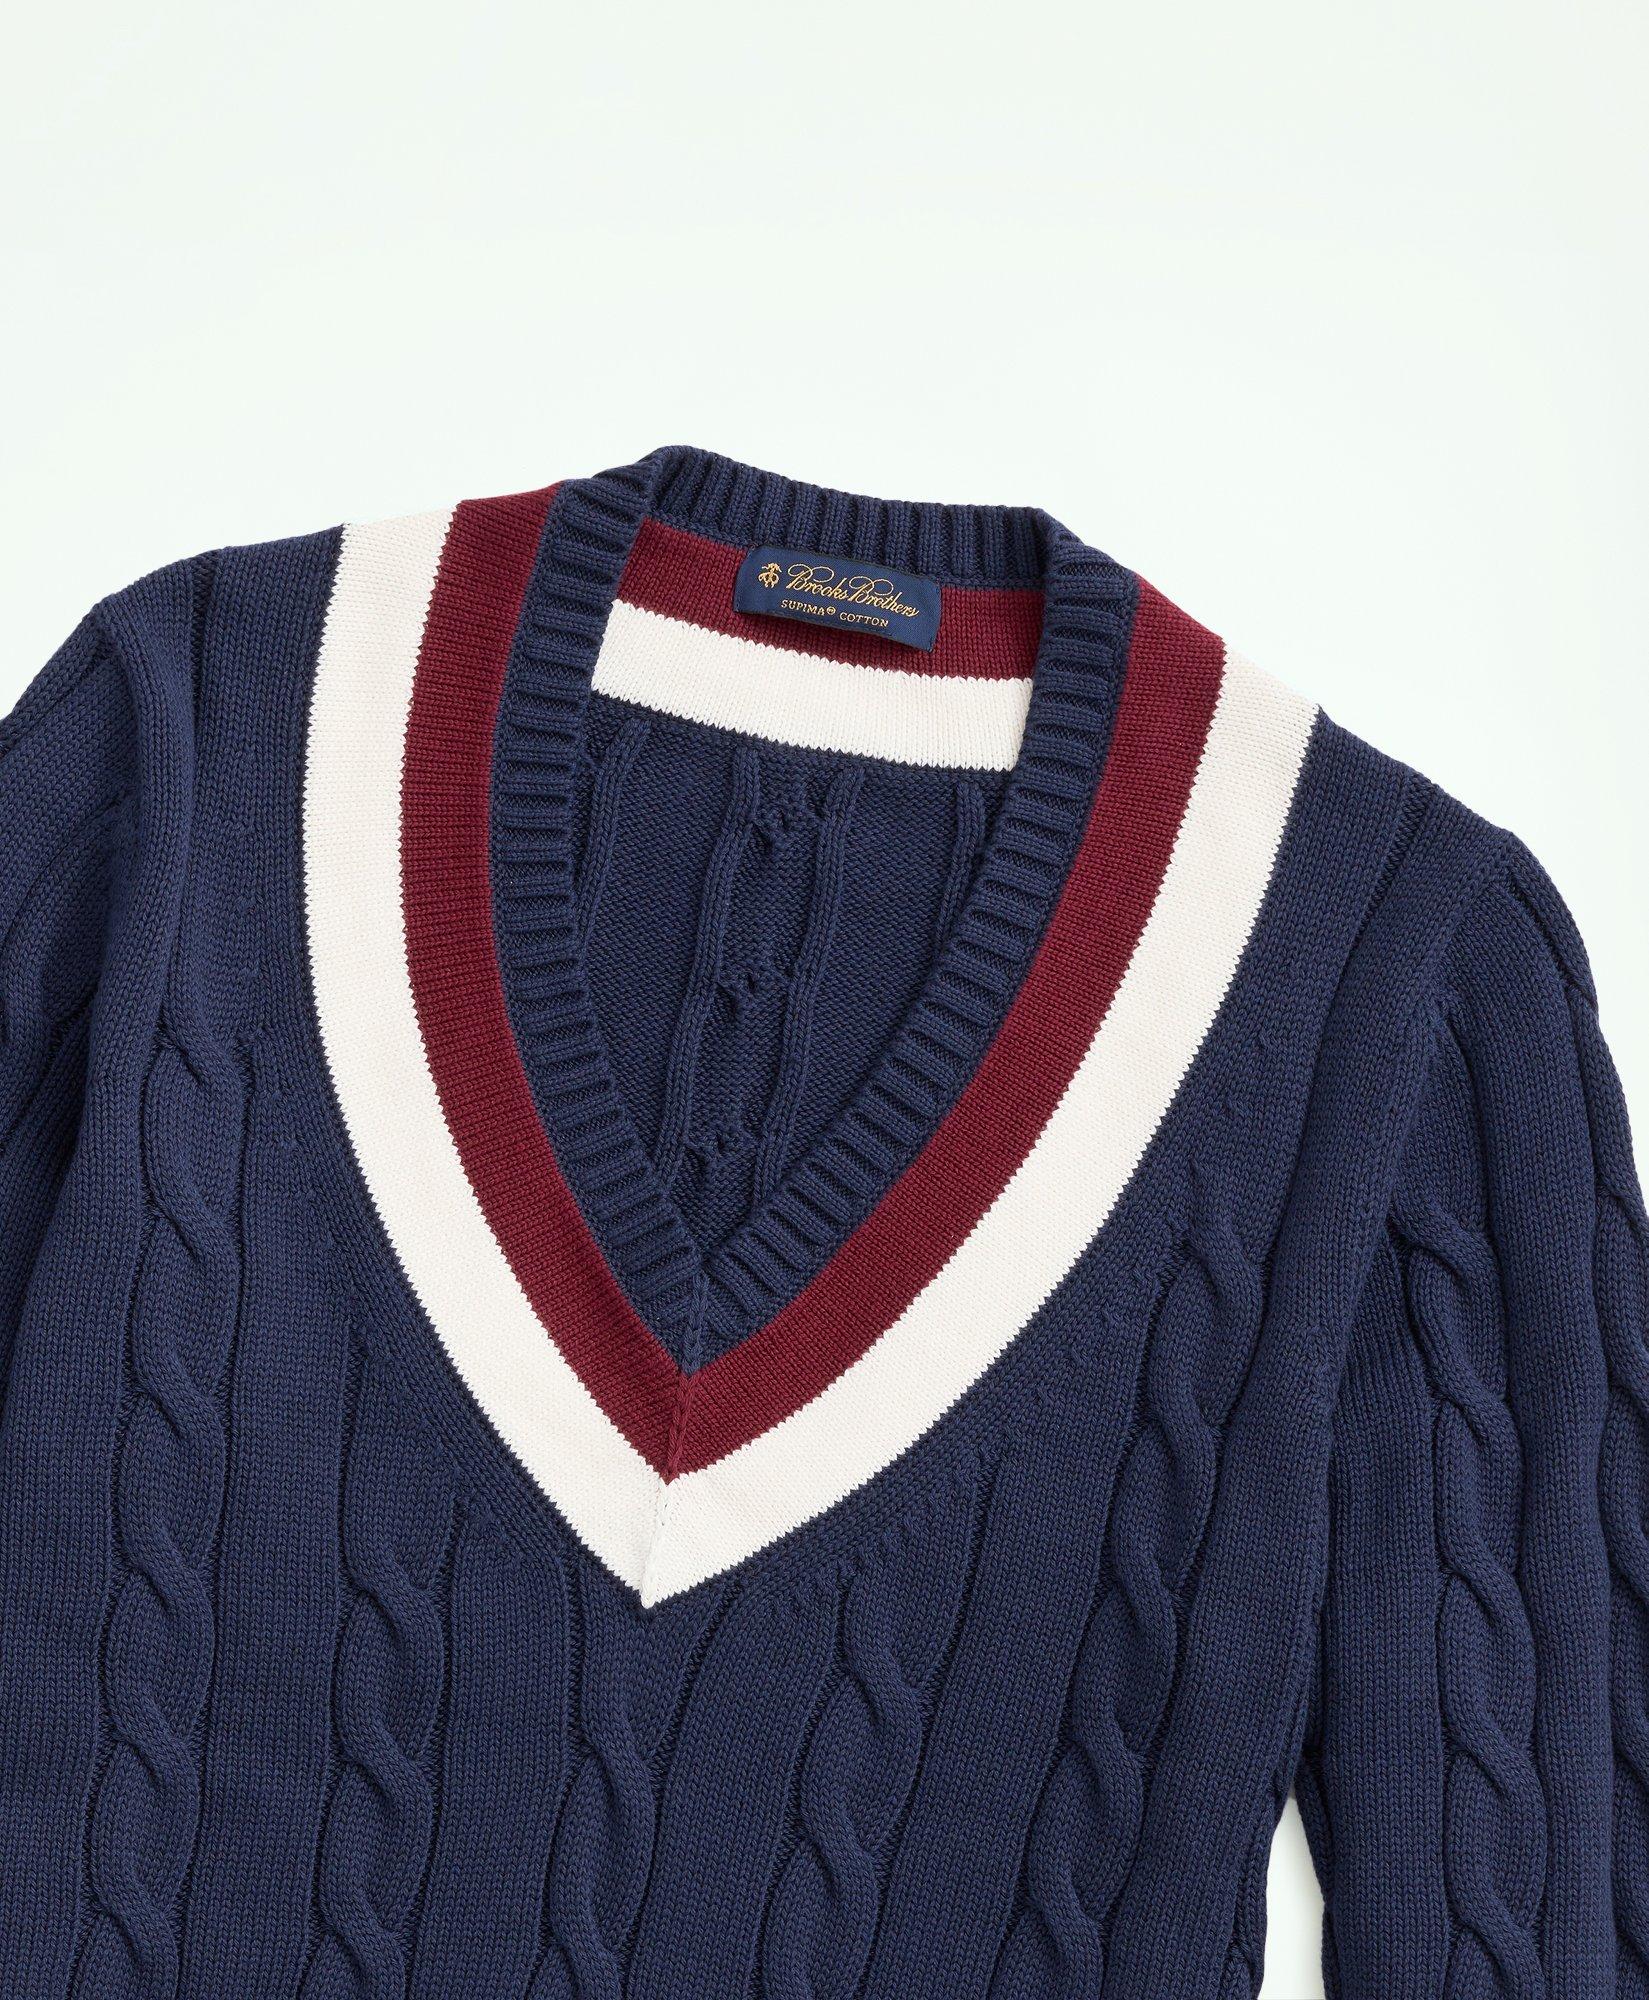 Brooks Brothers Men's Supima Cotton Windsurfer Intarsia Sweater | Blue | Size XL - Shop Holiday Gifts and Styles